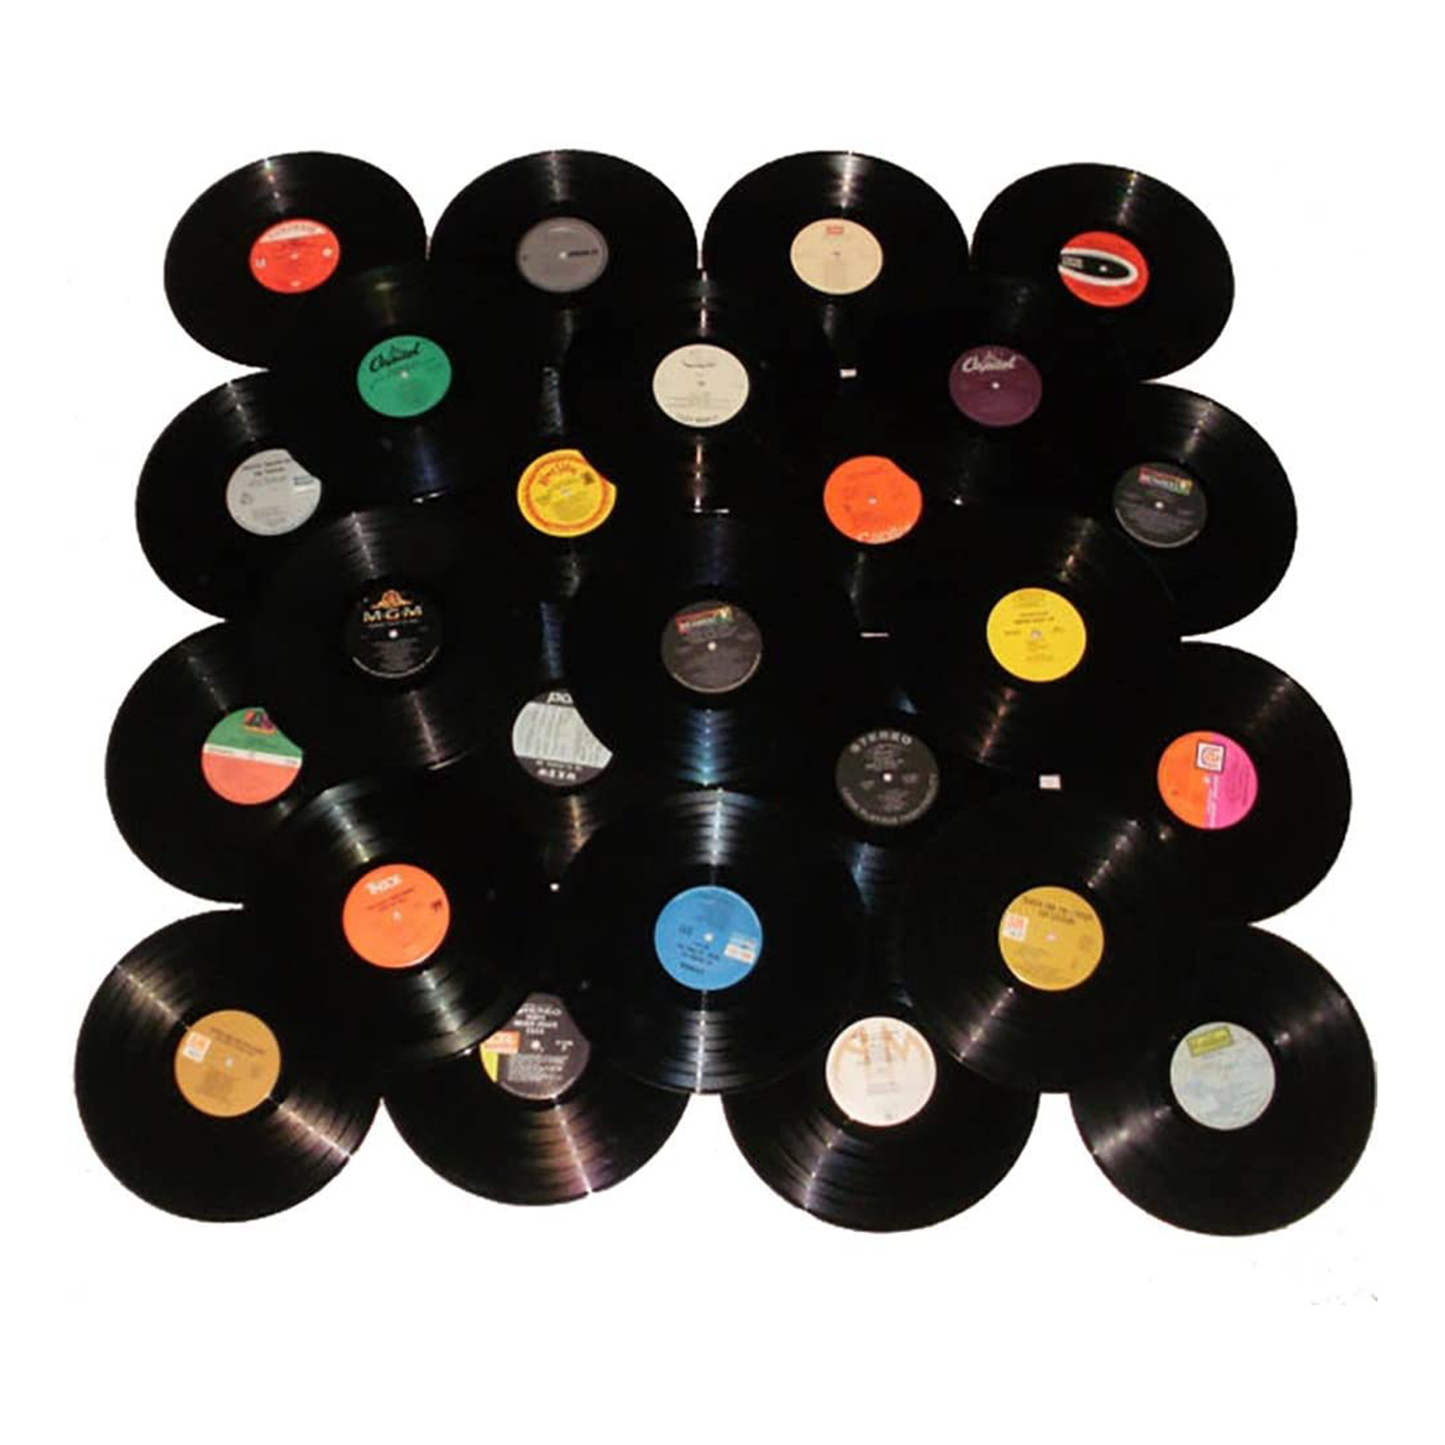 THE 10 BEST VINYL RECORDS TO ADD YOUR COLLECTION – Art&Science